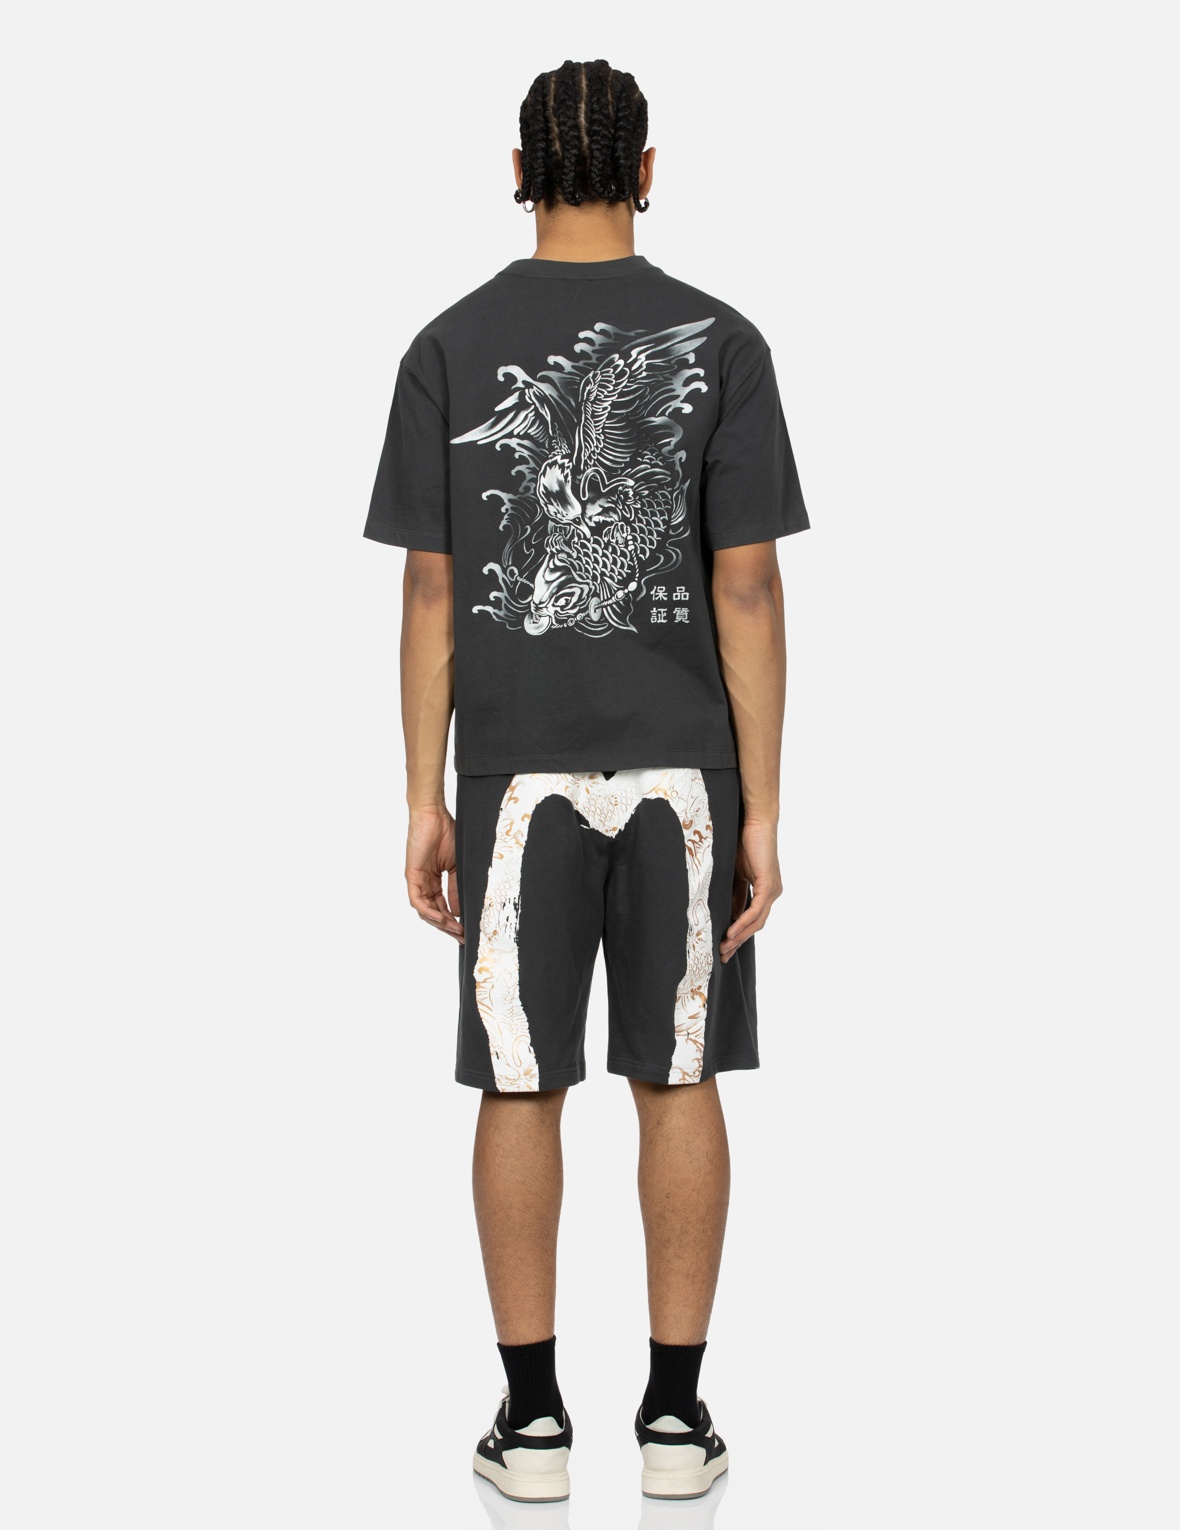 SEAGULL EMBROIDERY AND BRUSHSTROKE KOI SEAGULL DAICOCK PRINT RELAX FIT SWEAT SHORTS - 5